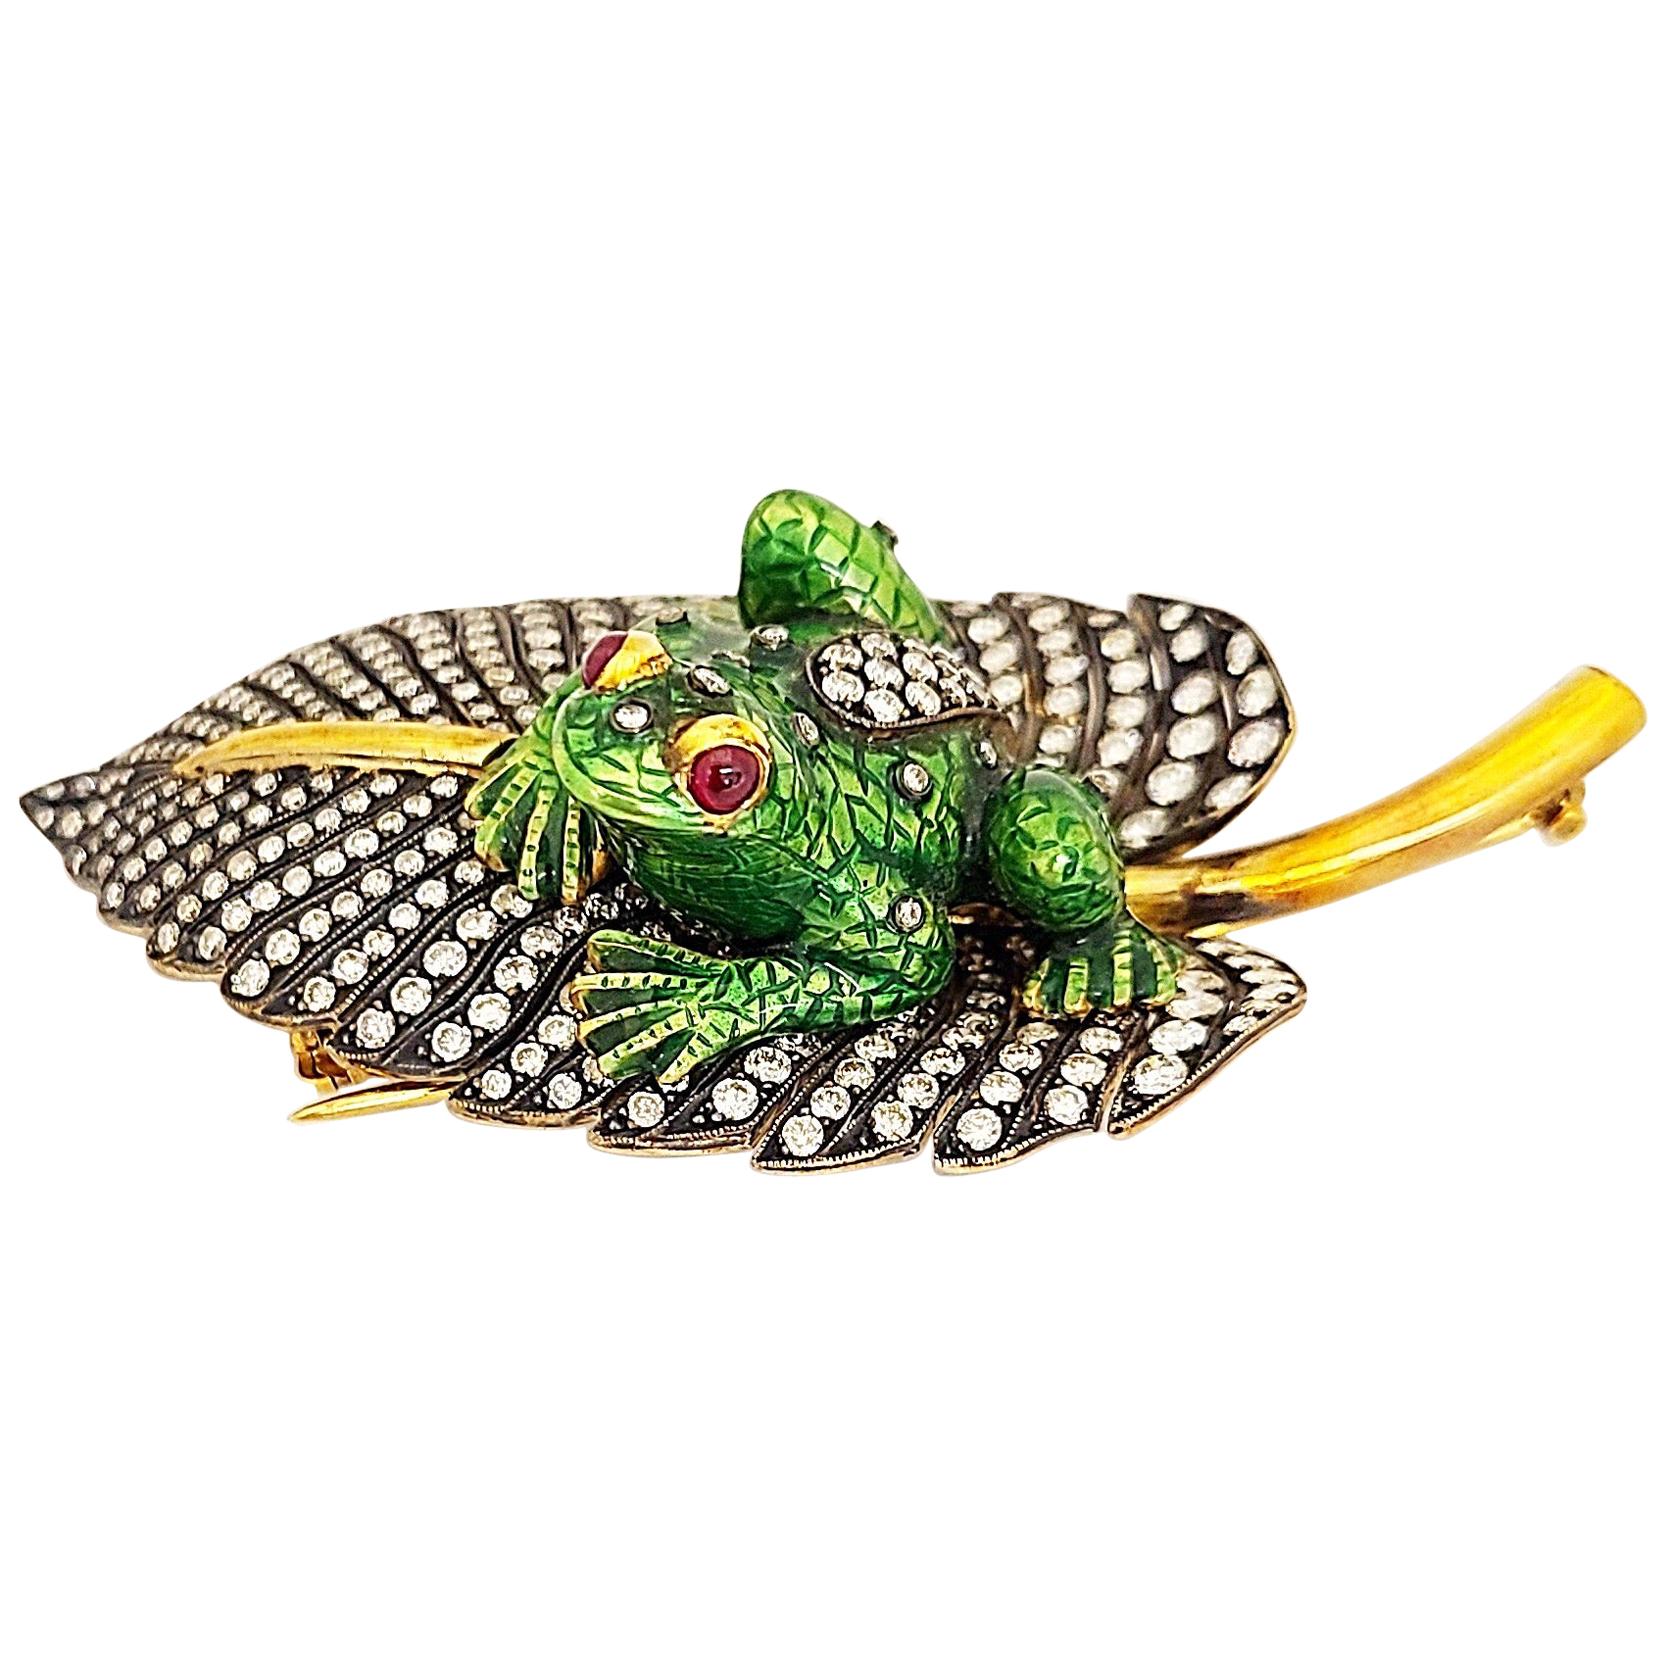 Irlan 18 Karat Gold and Enamel Frog on a 5.65 Carat Diamond Lily Pad Brooch For Sale